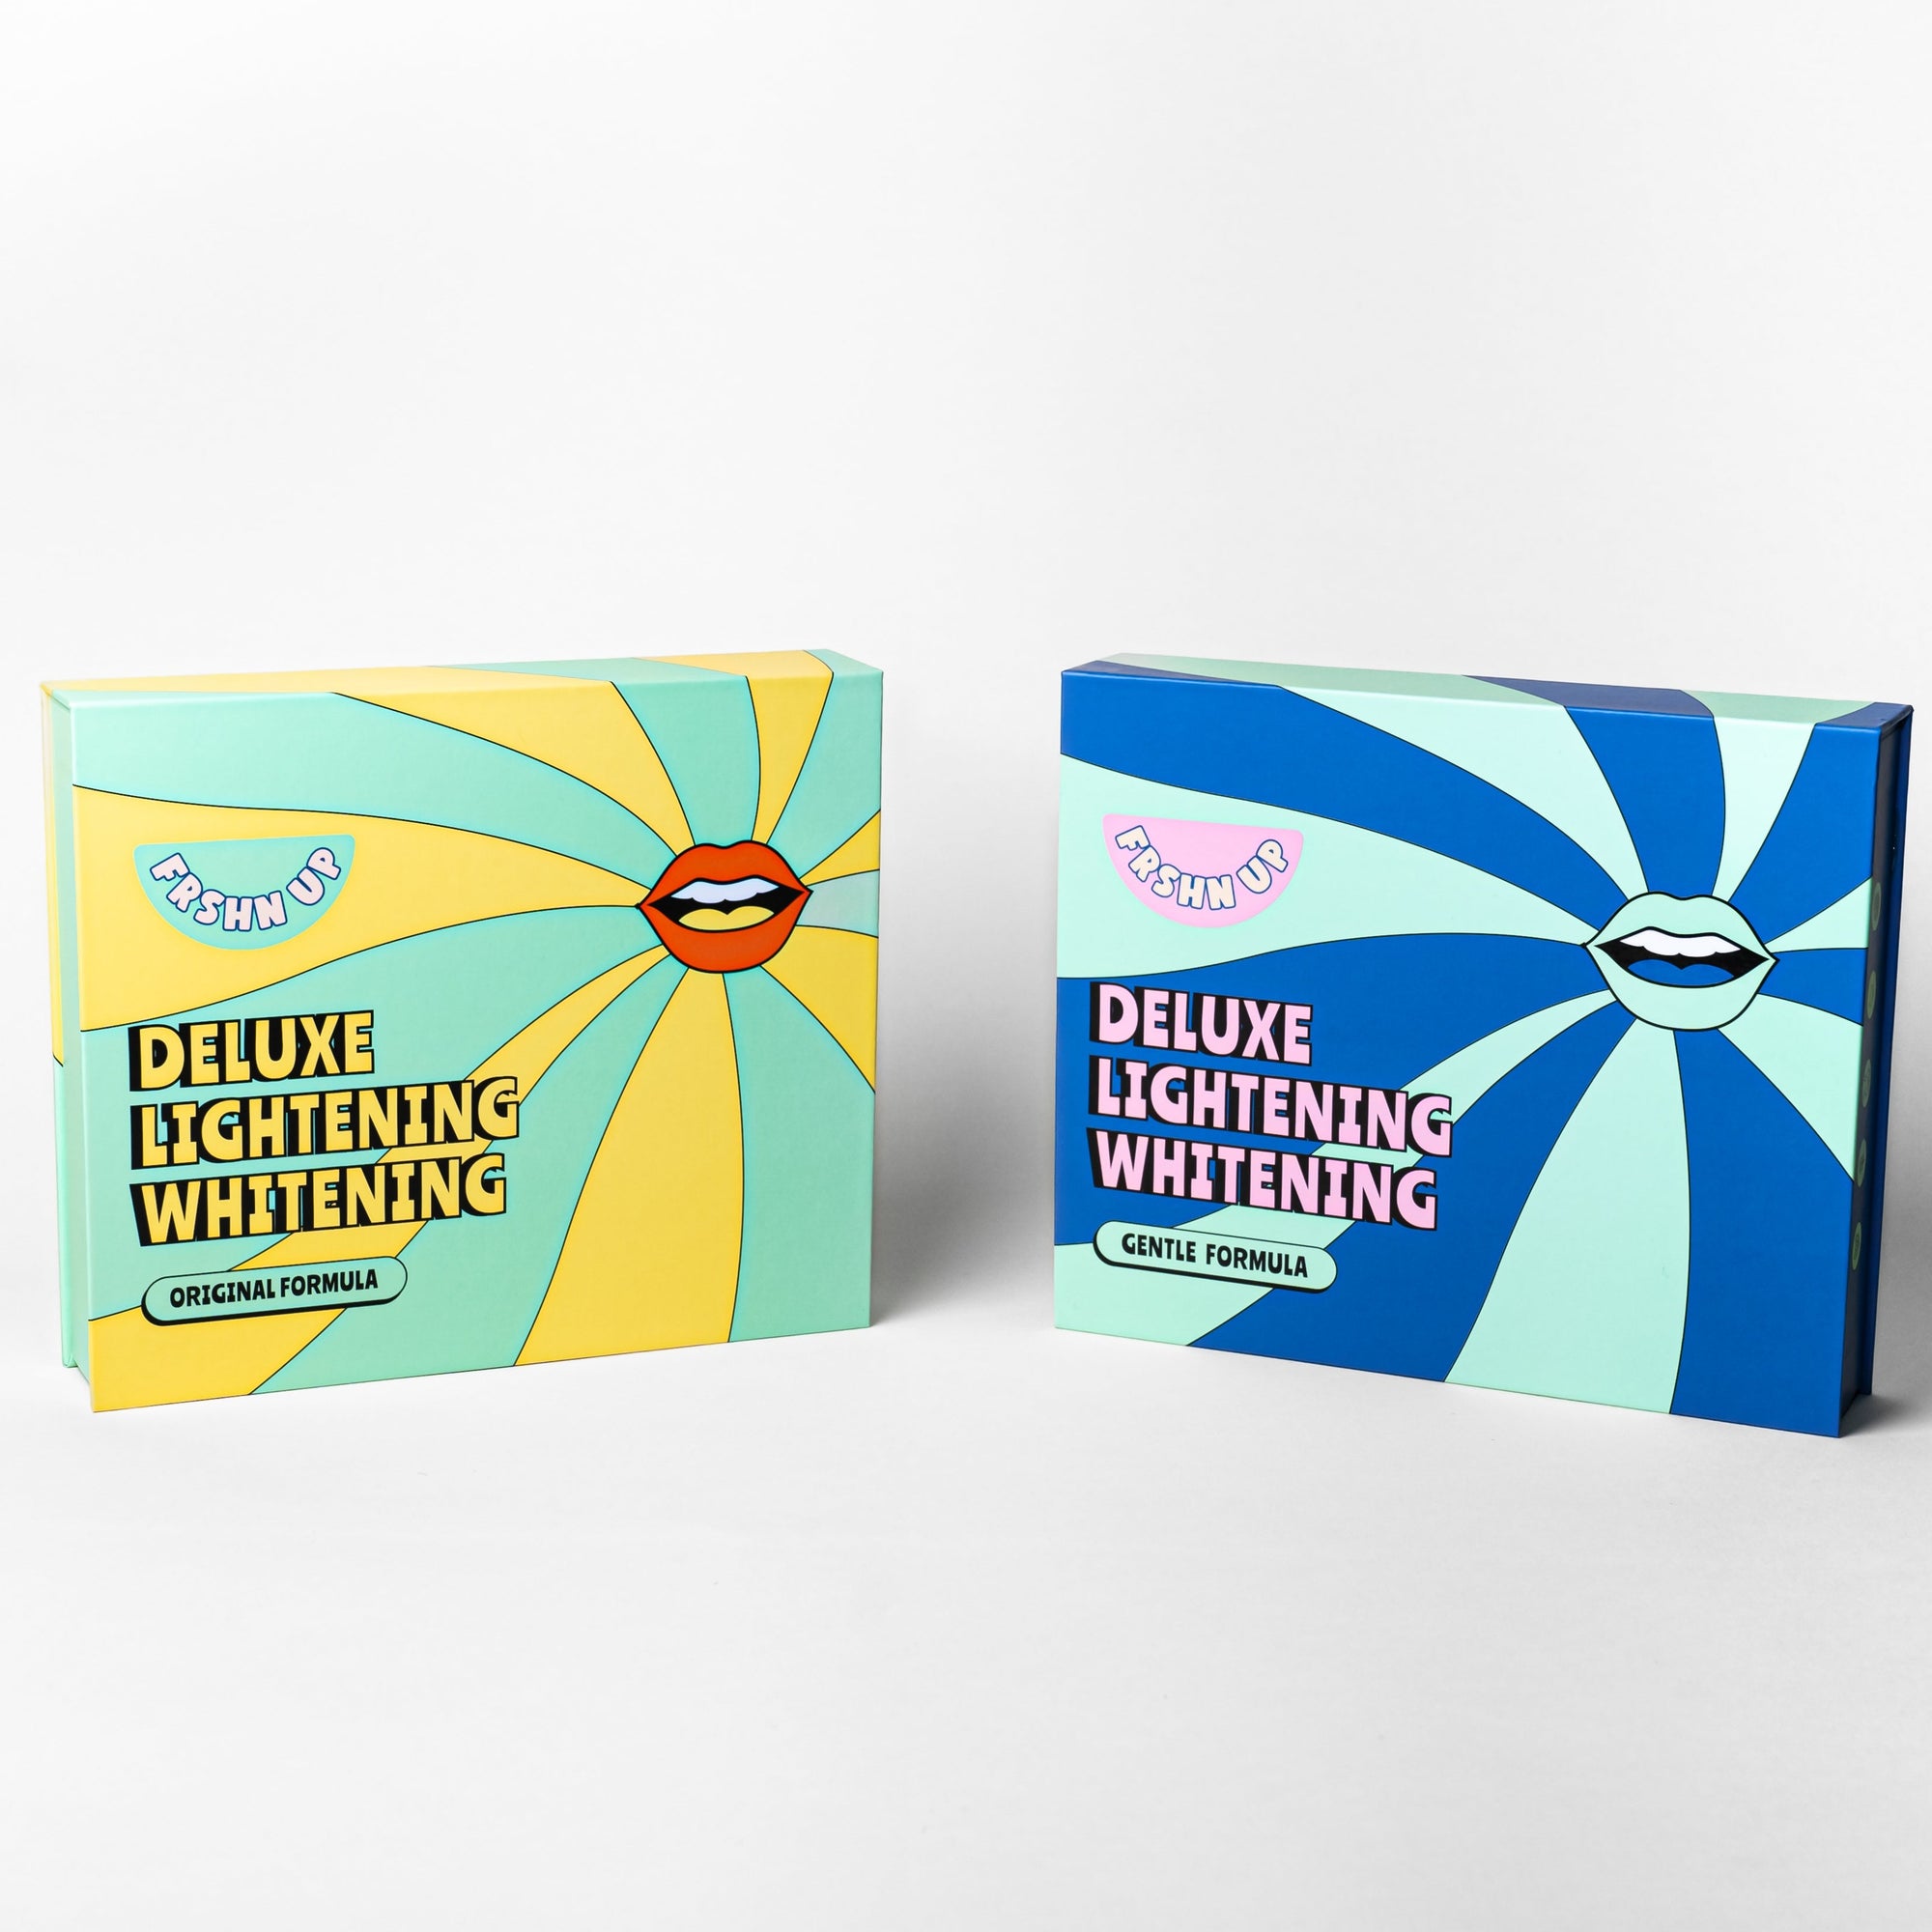 Two blue and yellow boxes with a smiley face on them, perfect for Family or friends looking for pearly-whites-brightening solutions in our FRSHN UP Brightening Bundle.